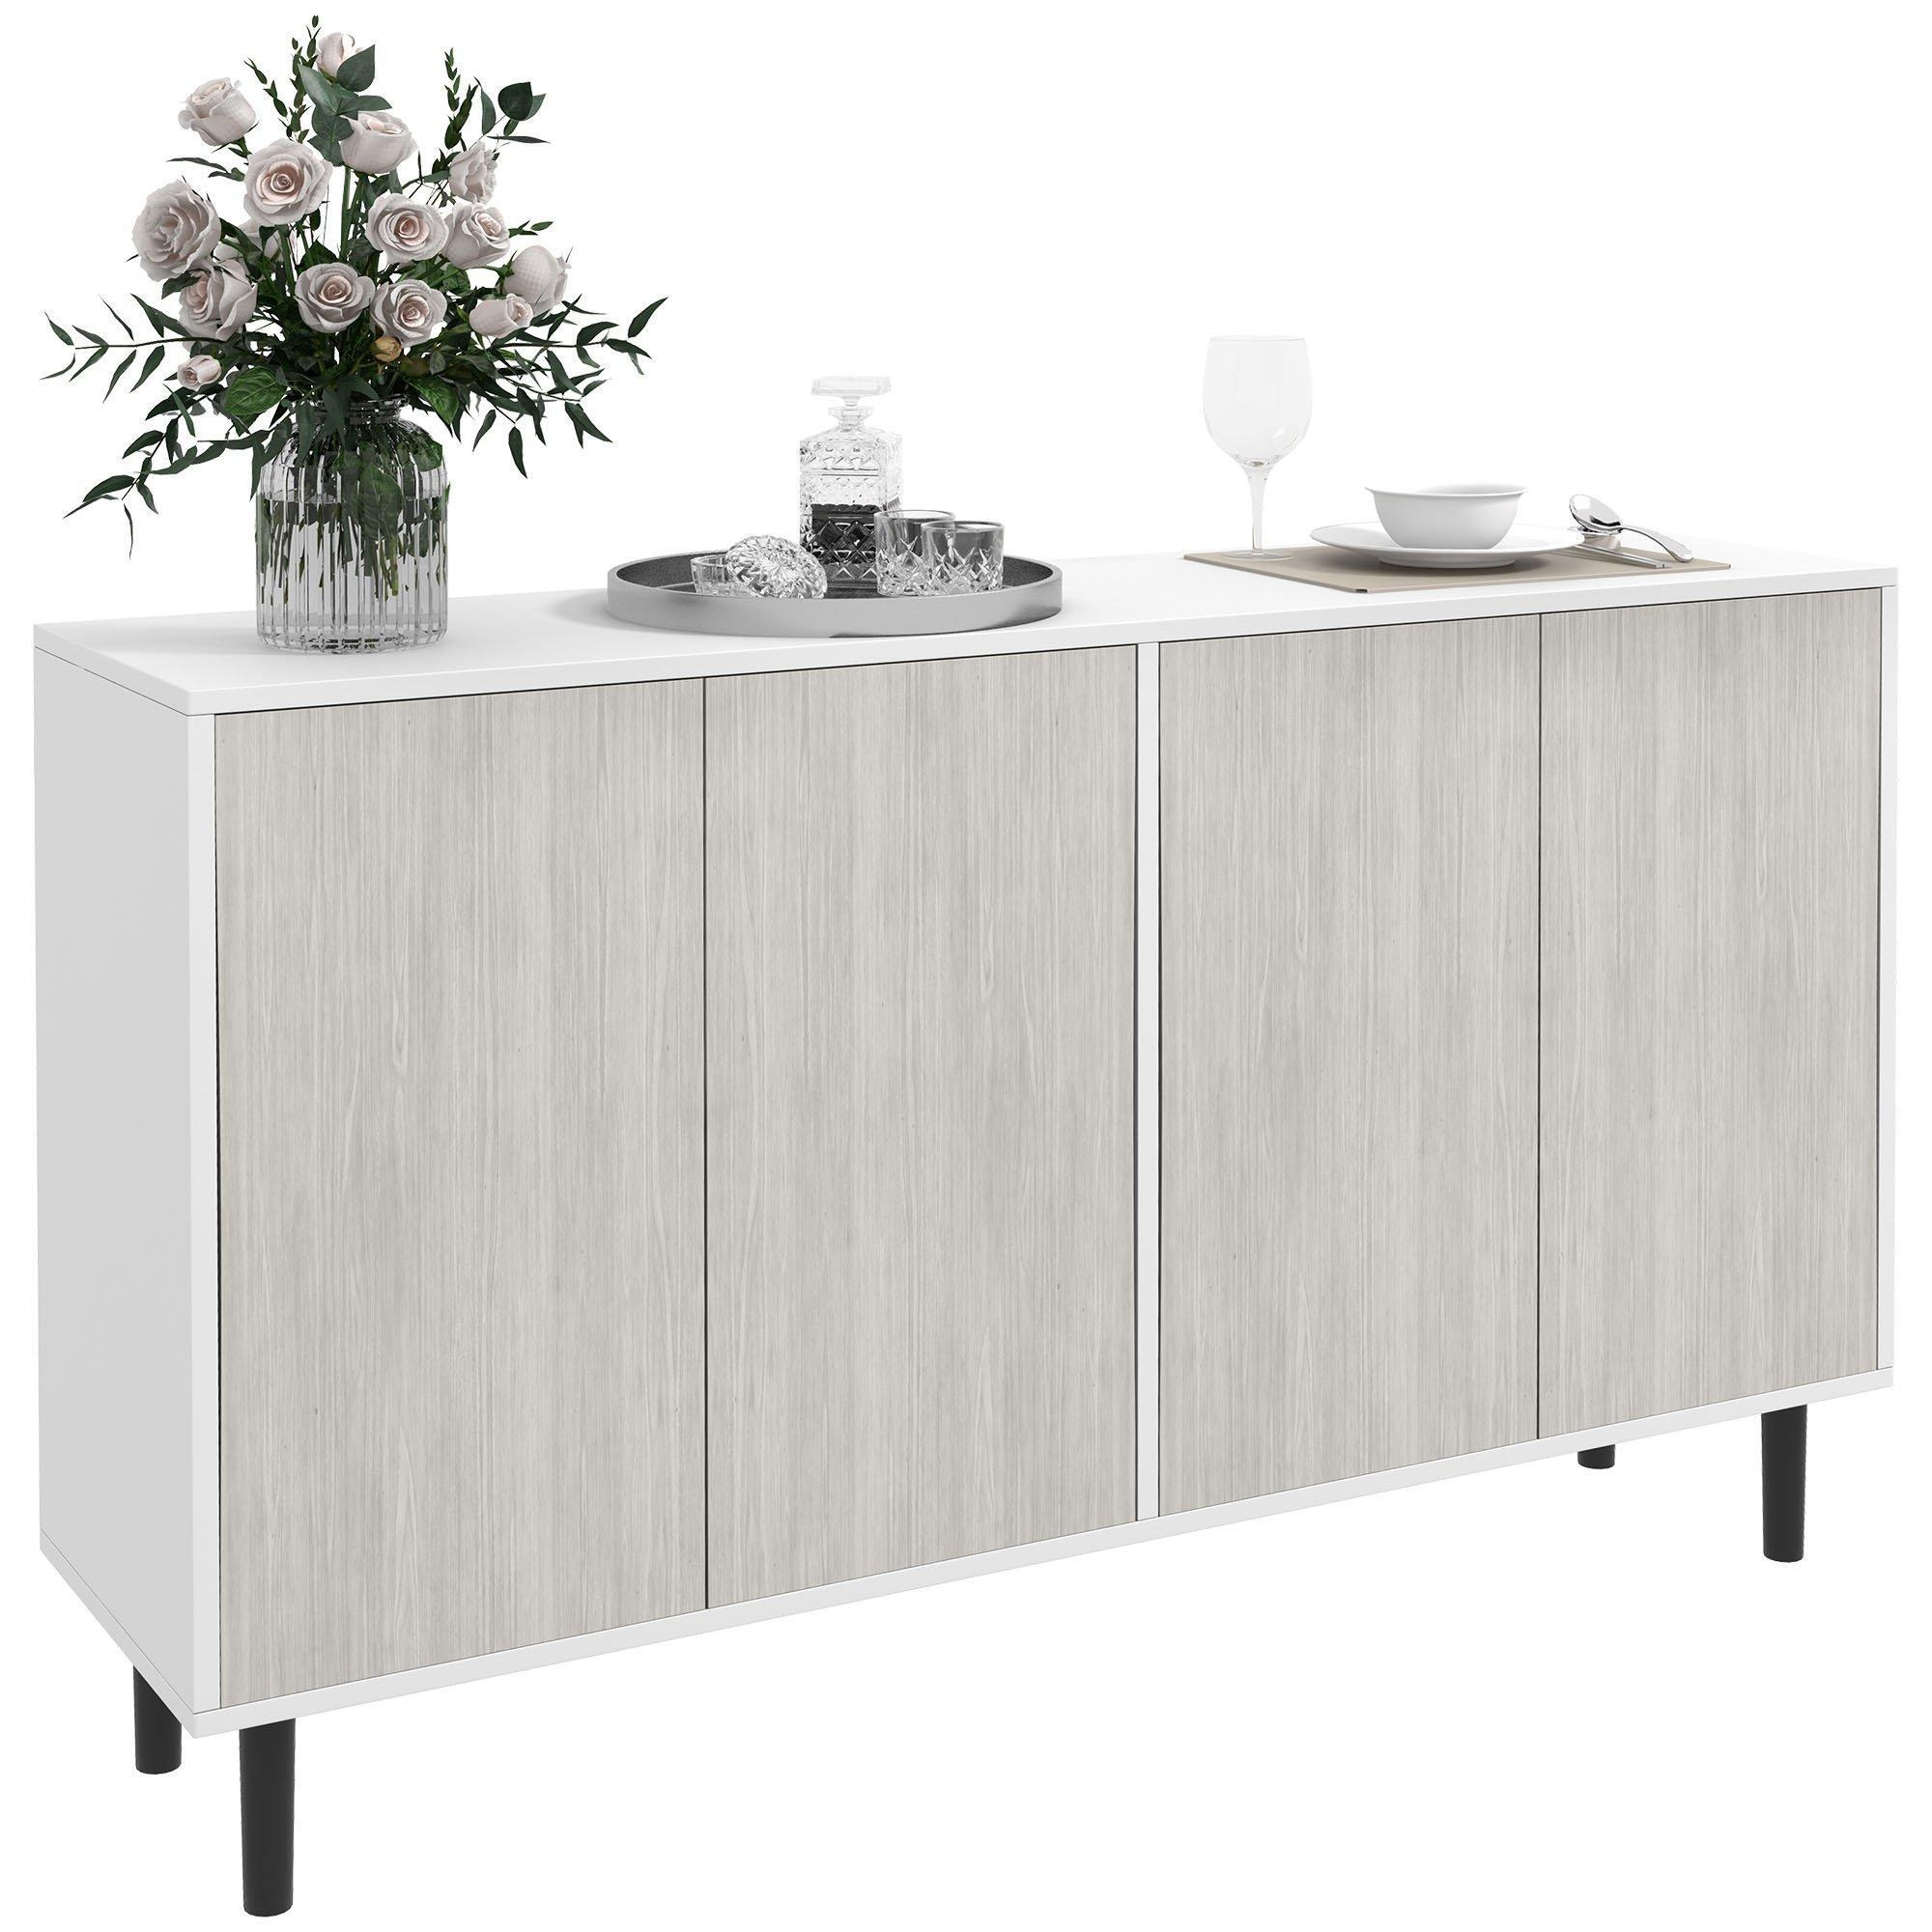 Sideboard Kitchen Storage Cabinet with 2 Cupboards Solid Wood Legs - image 1